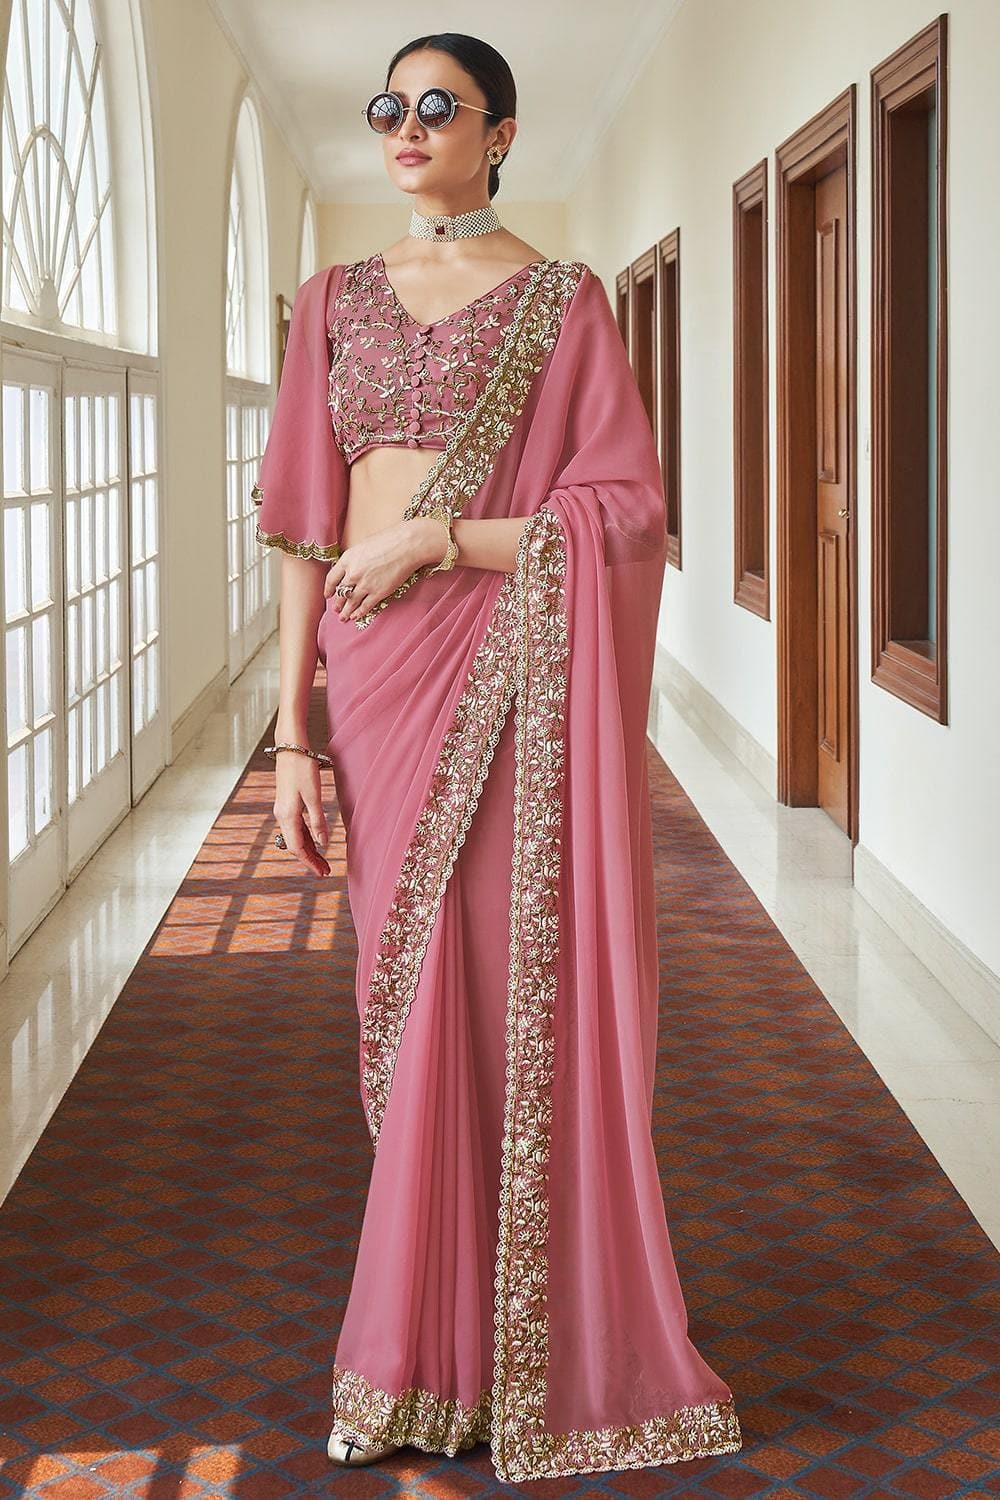 Beauteous Pink Fancy Fabric Based Kajal Agrawal Saree Design – FOURMATCHING